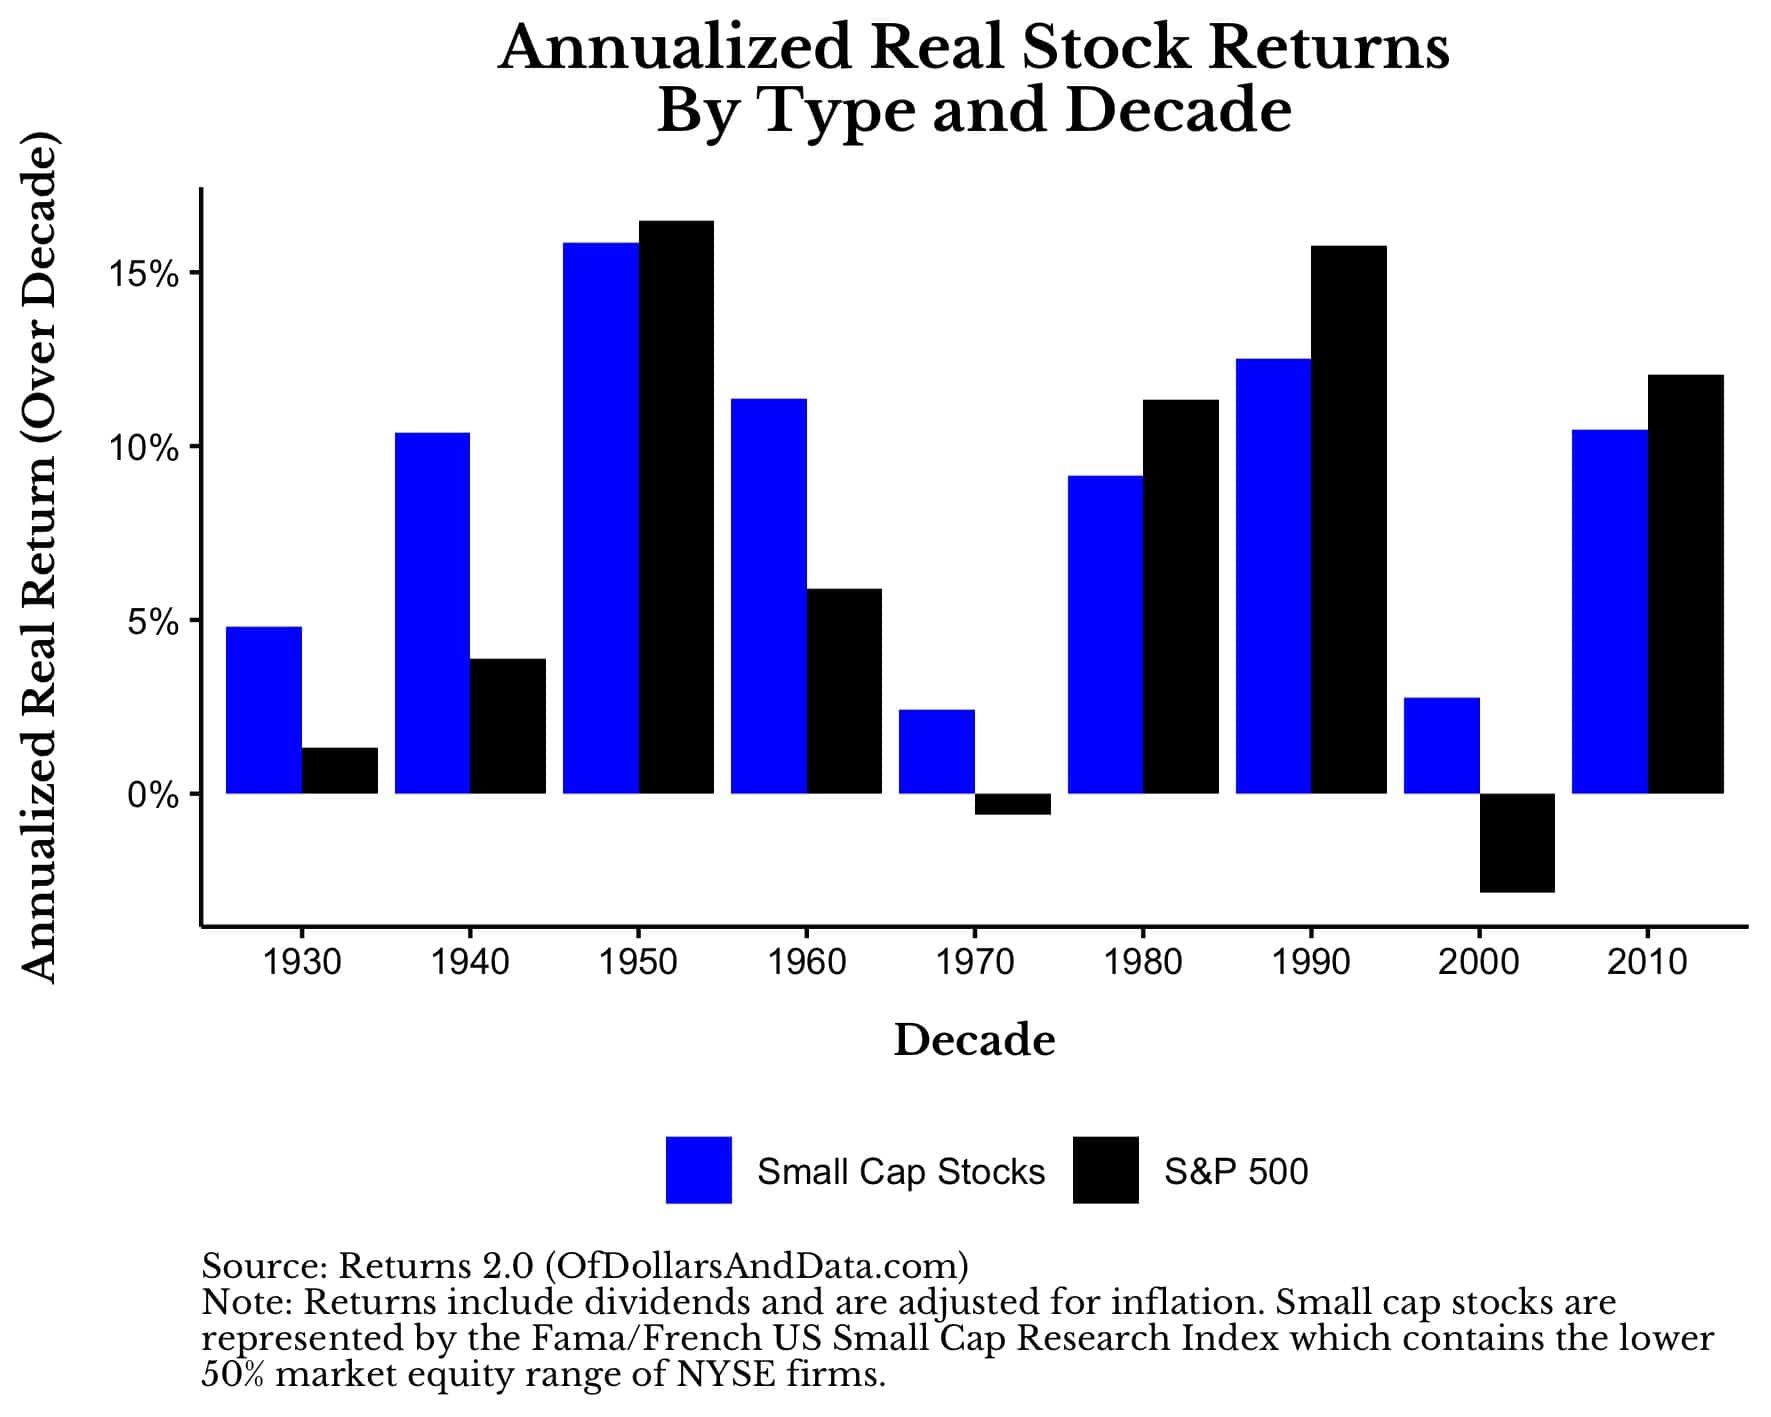 Chart showing small cap stock and S&P 500 annualized real return by decade from 1920 to 2019.